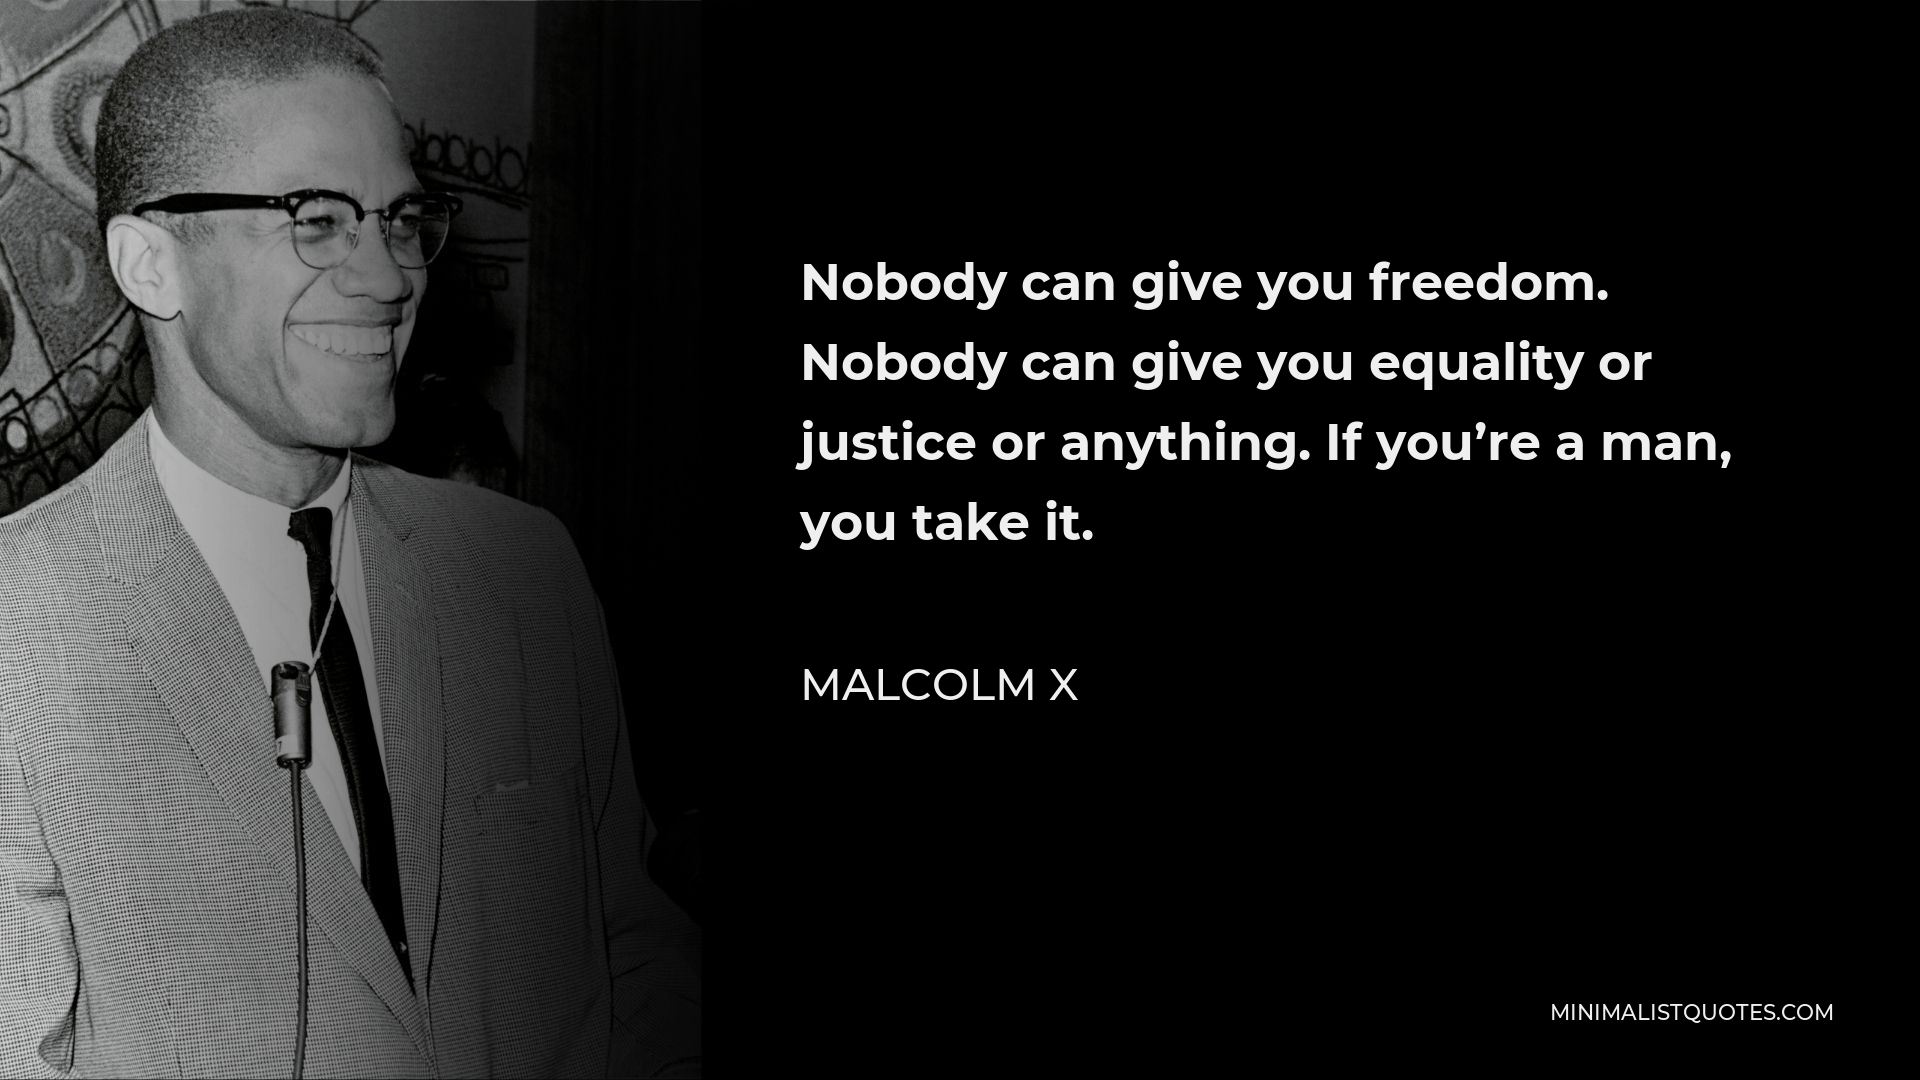 Malcolm X Quote - Nobody can give you freedom. Nobody can give you equality or justice or anything. If you’re a man, you take it.